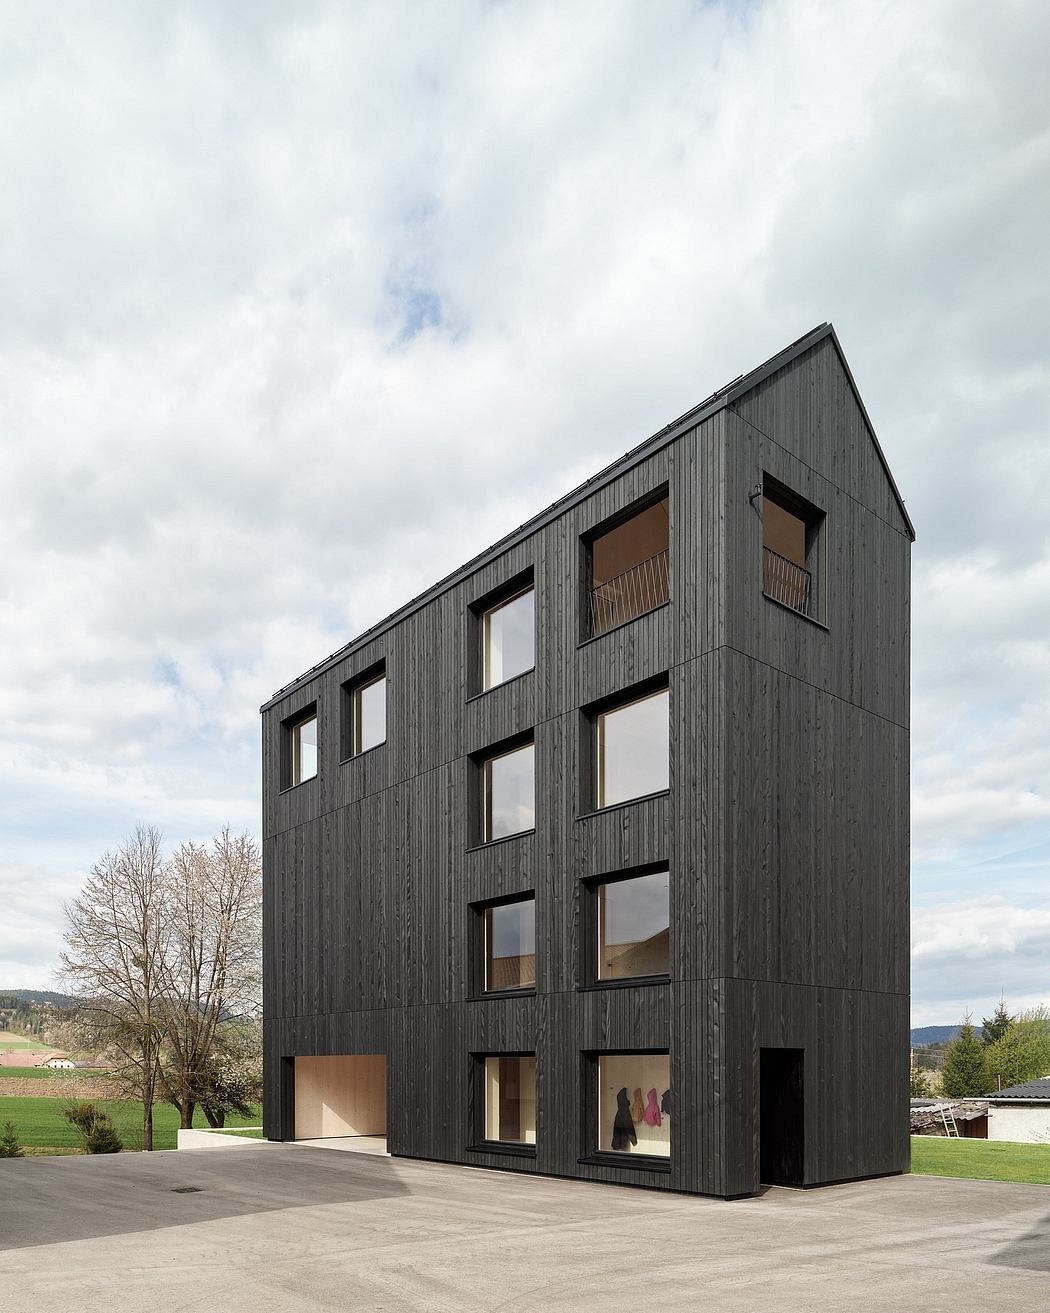 Striking modern building with clean lines, extensive windows, and a dark wooden exterior.